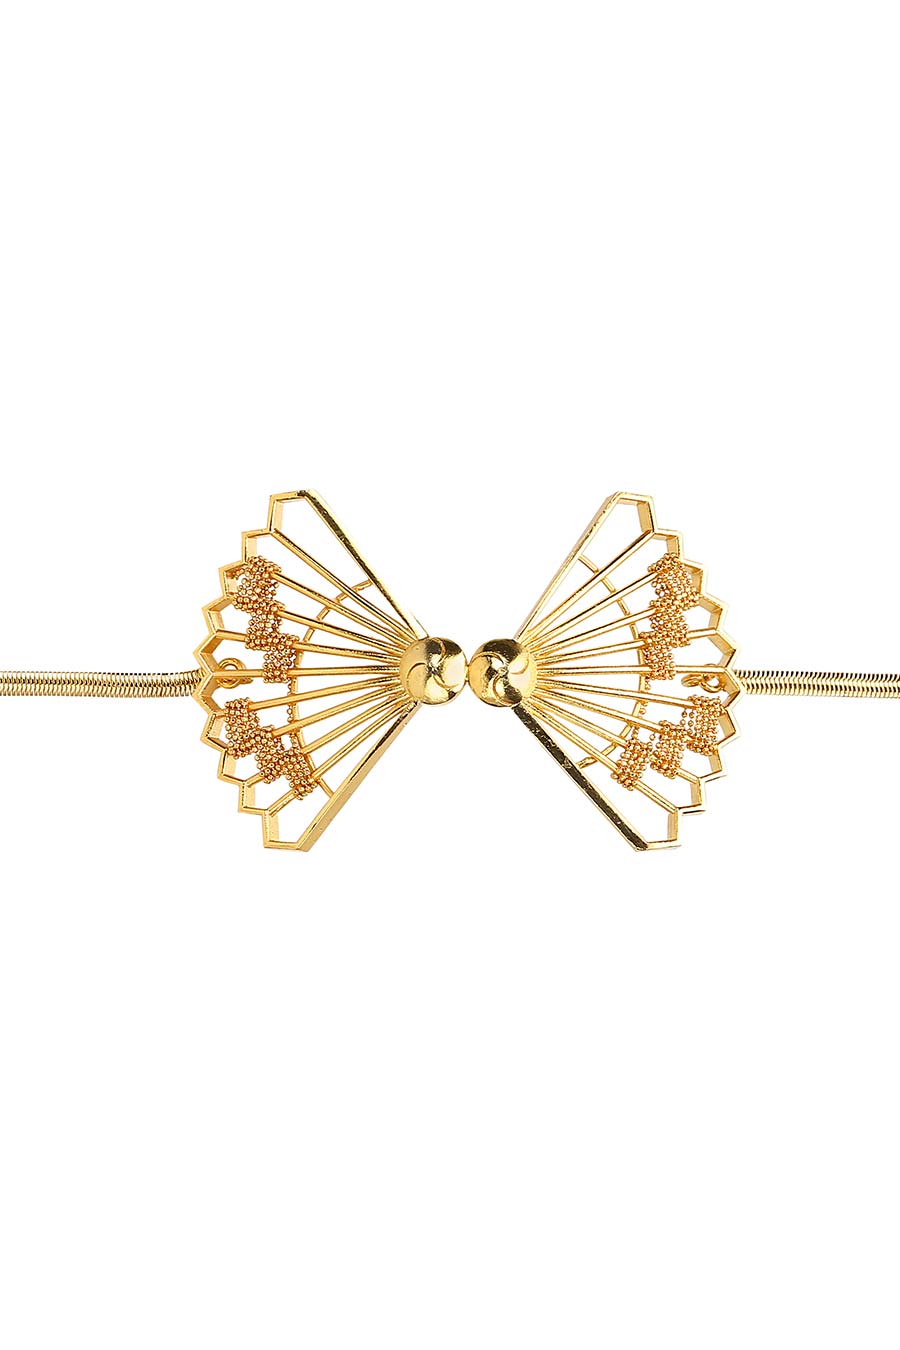 Shuttle Cock Shaped Gold Plated Necklace